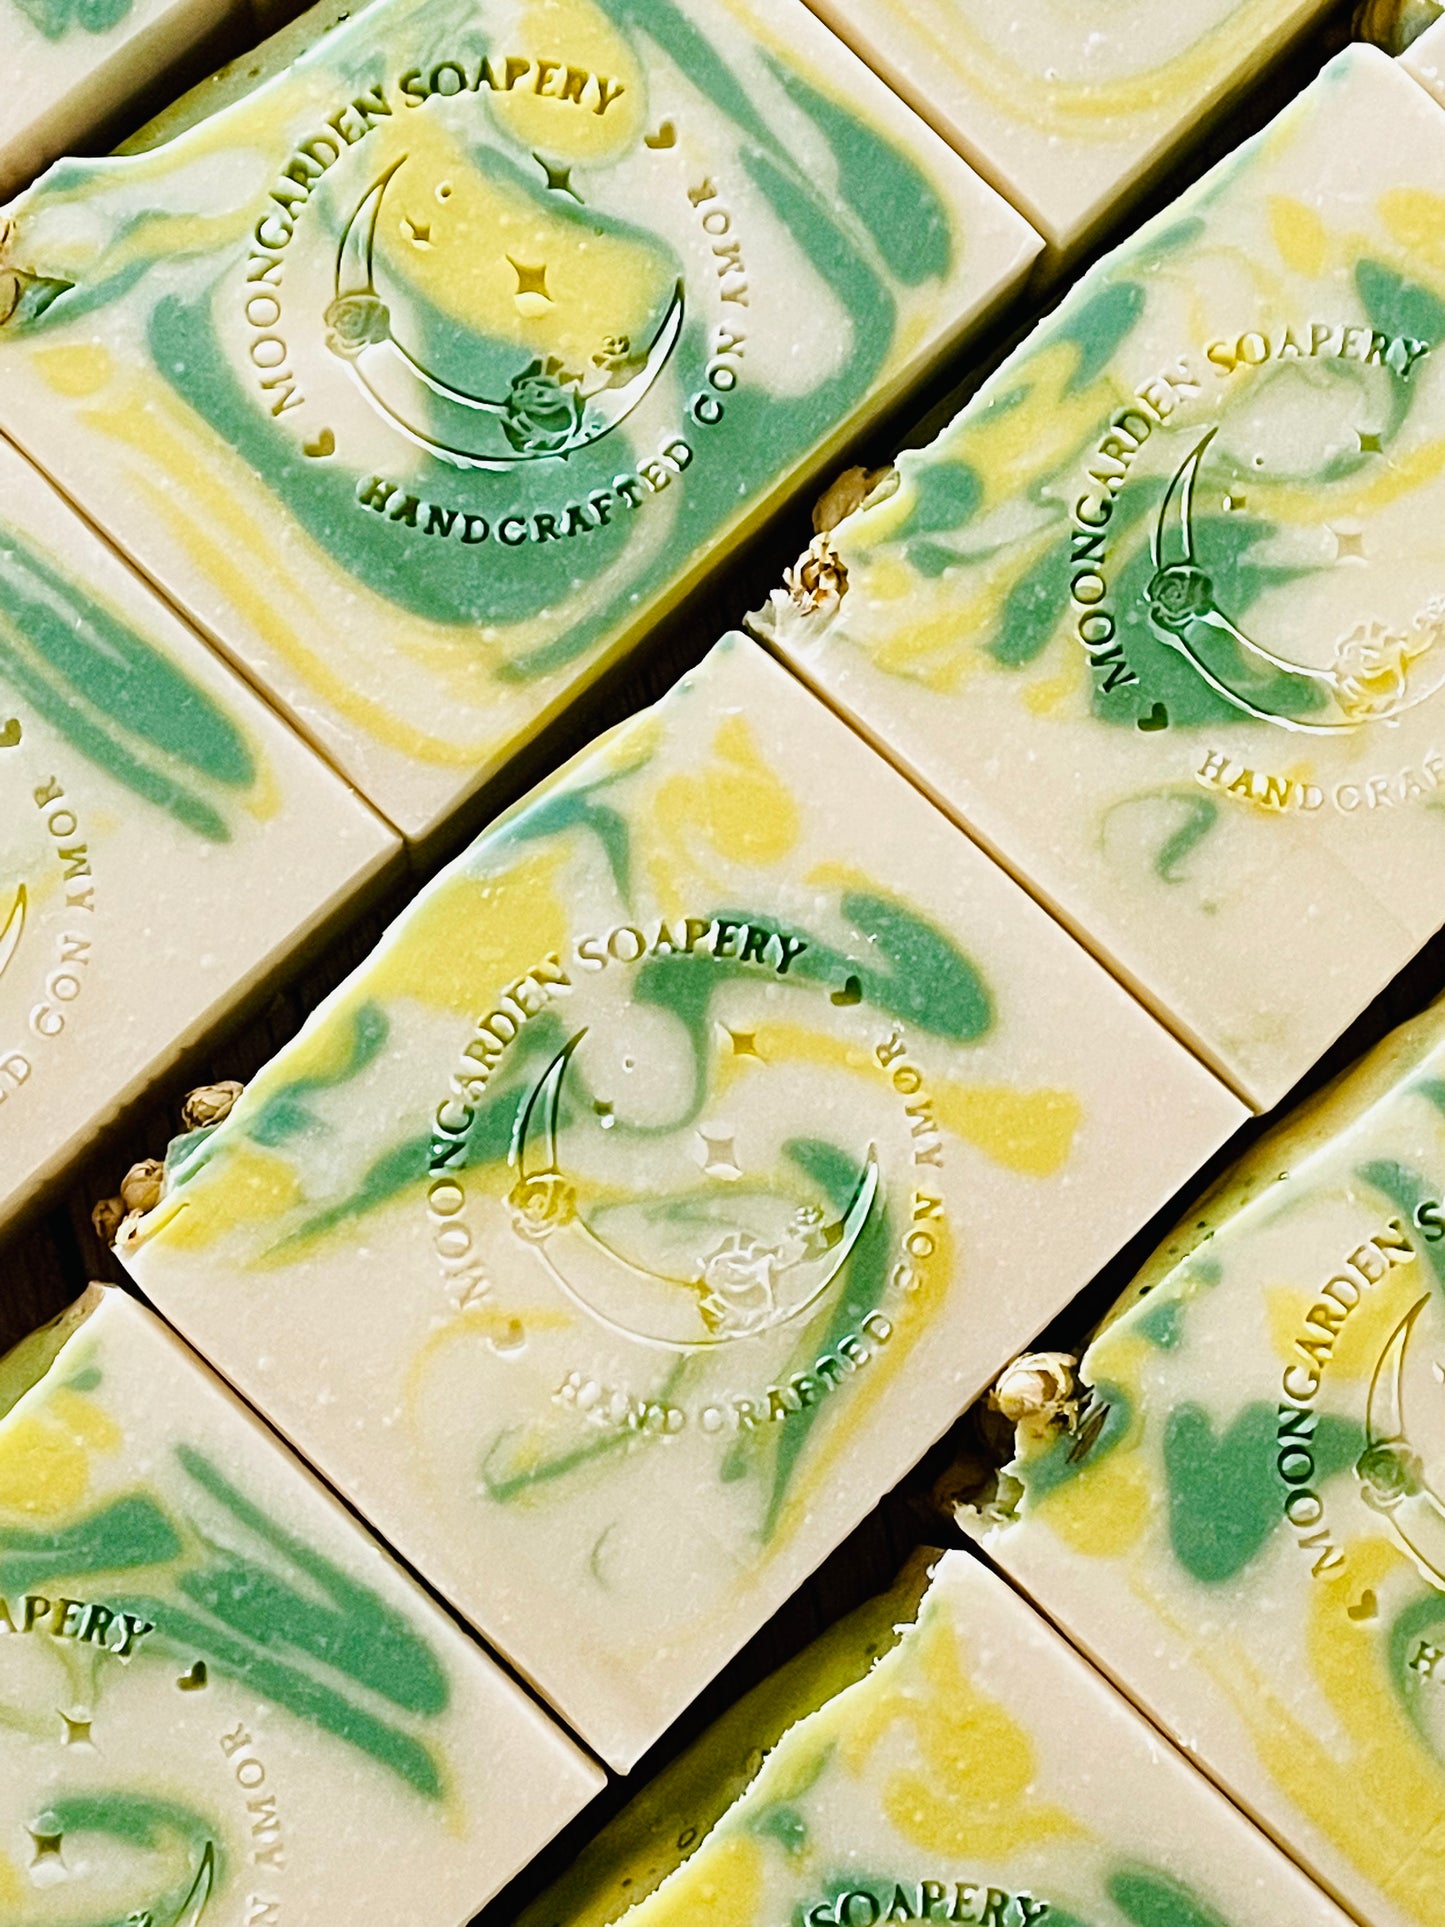 A closeup of some Honorable G. bar soaps. 